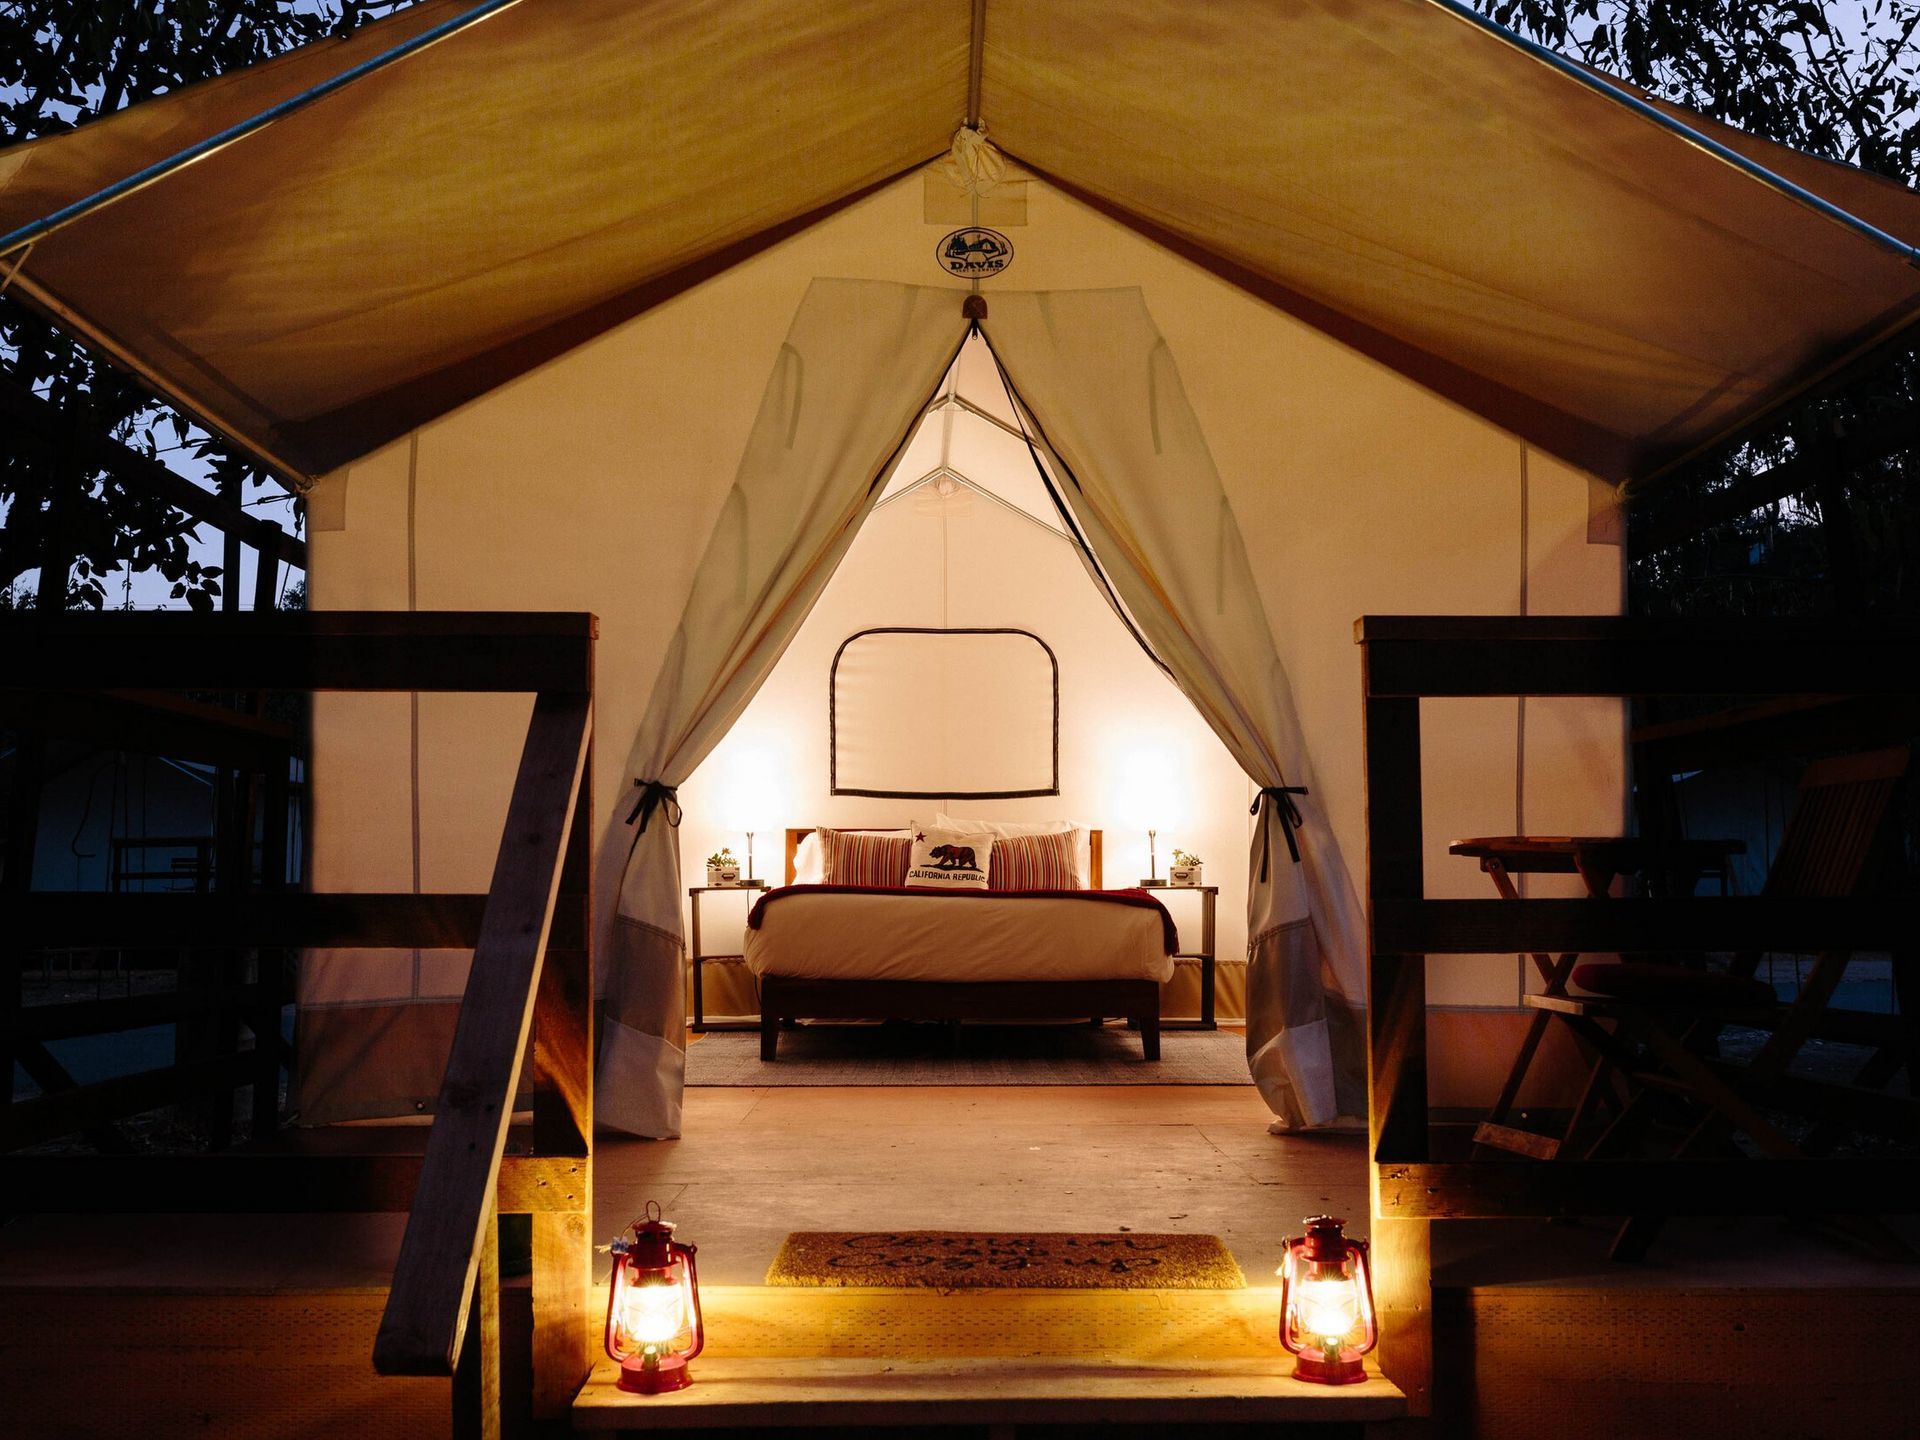 electricity and heaters in tents - Wildhaven Yosemite Glamping